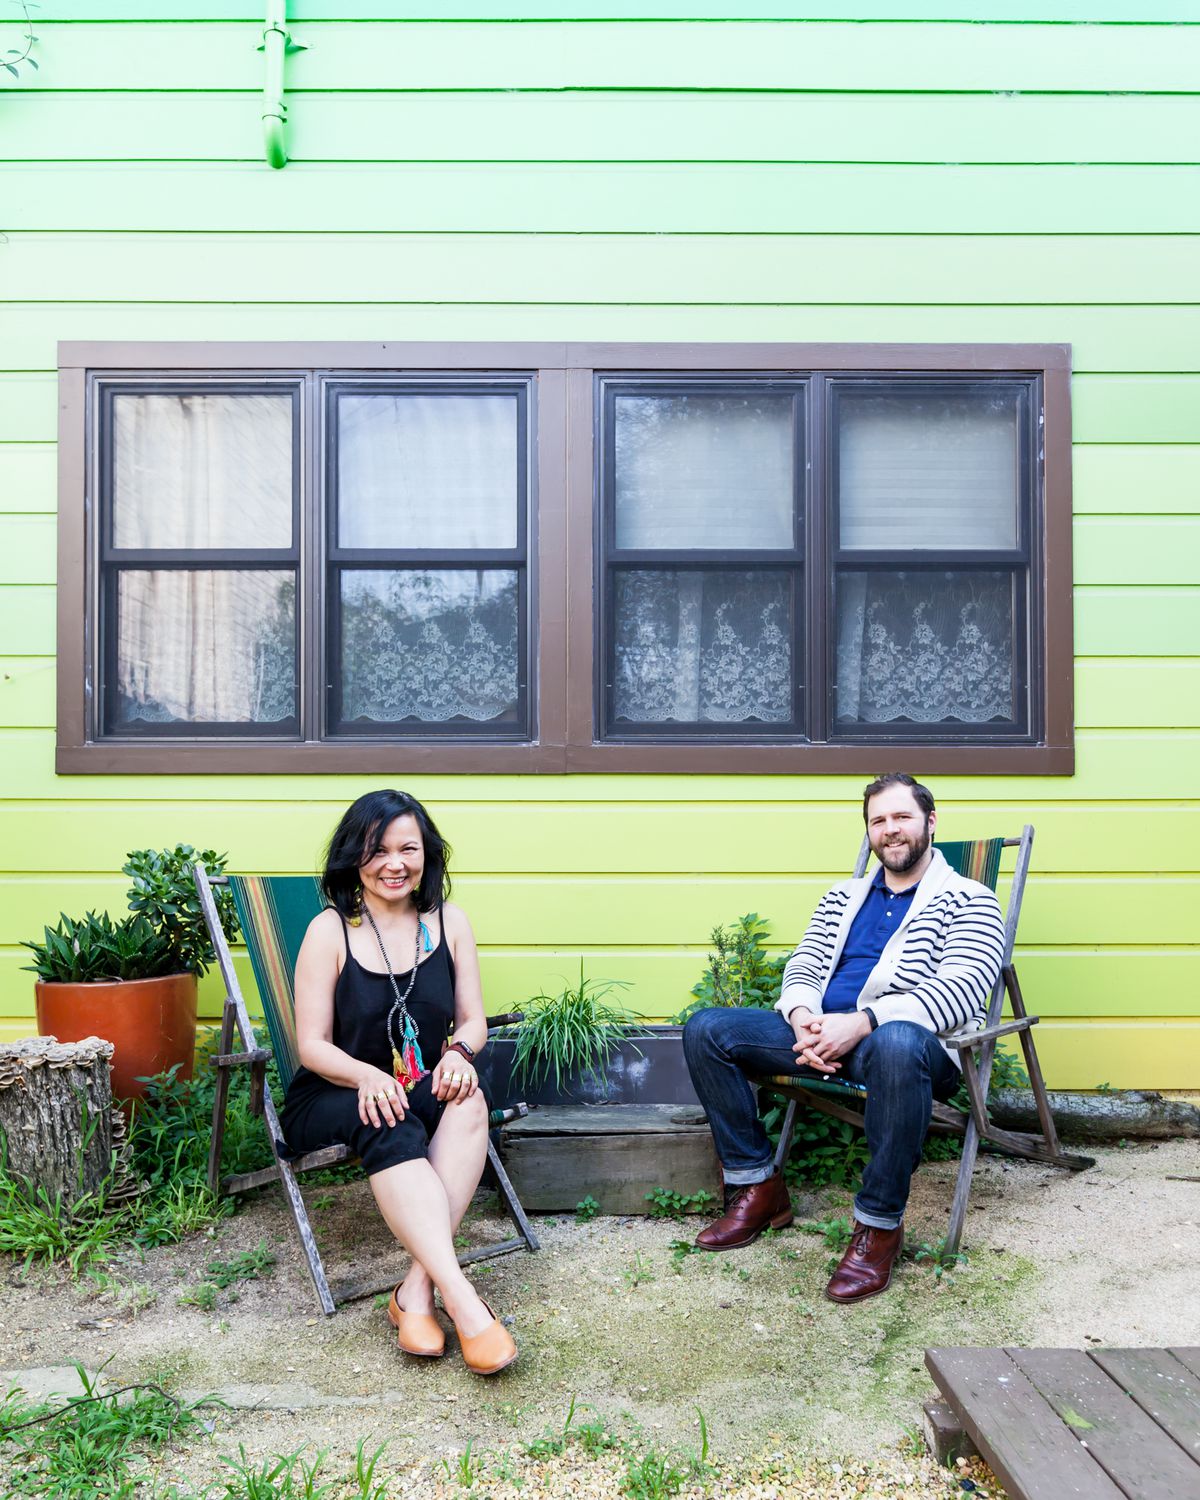 Chien and her boyfriend, Gary L. Baker, stand against the rear exterior wall of the house that she had painted in an ombre pattern.